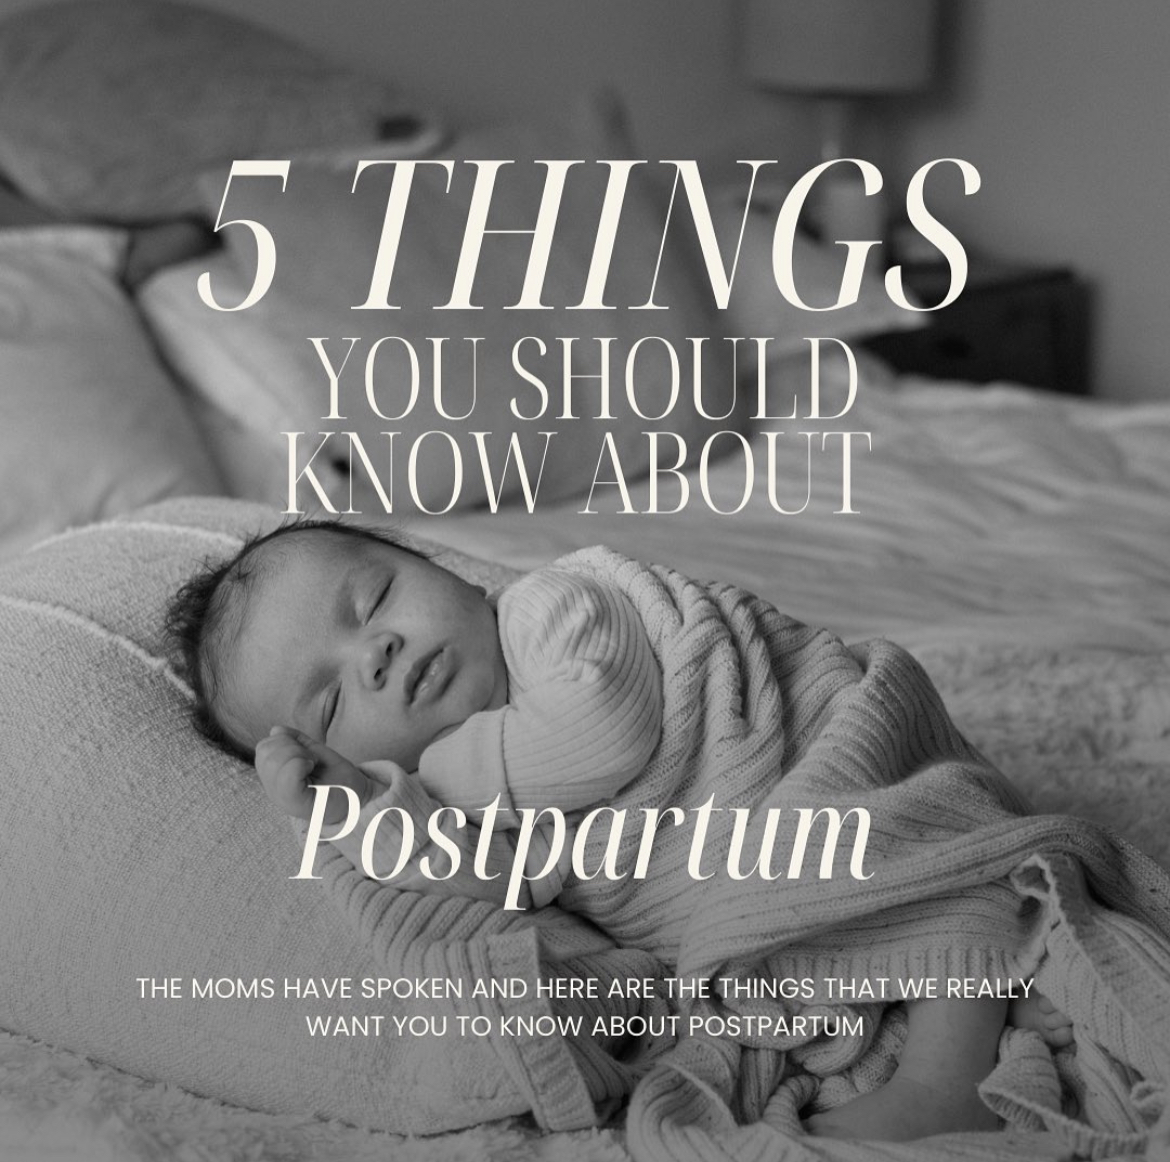 5 things you should know about postpartum